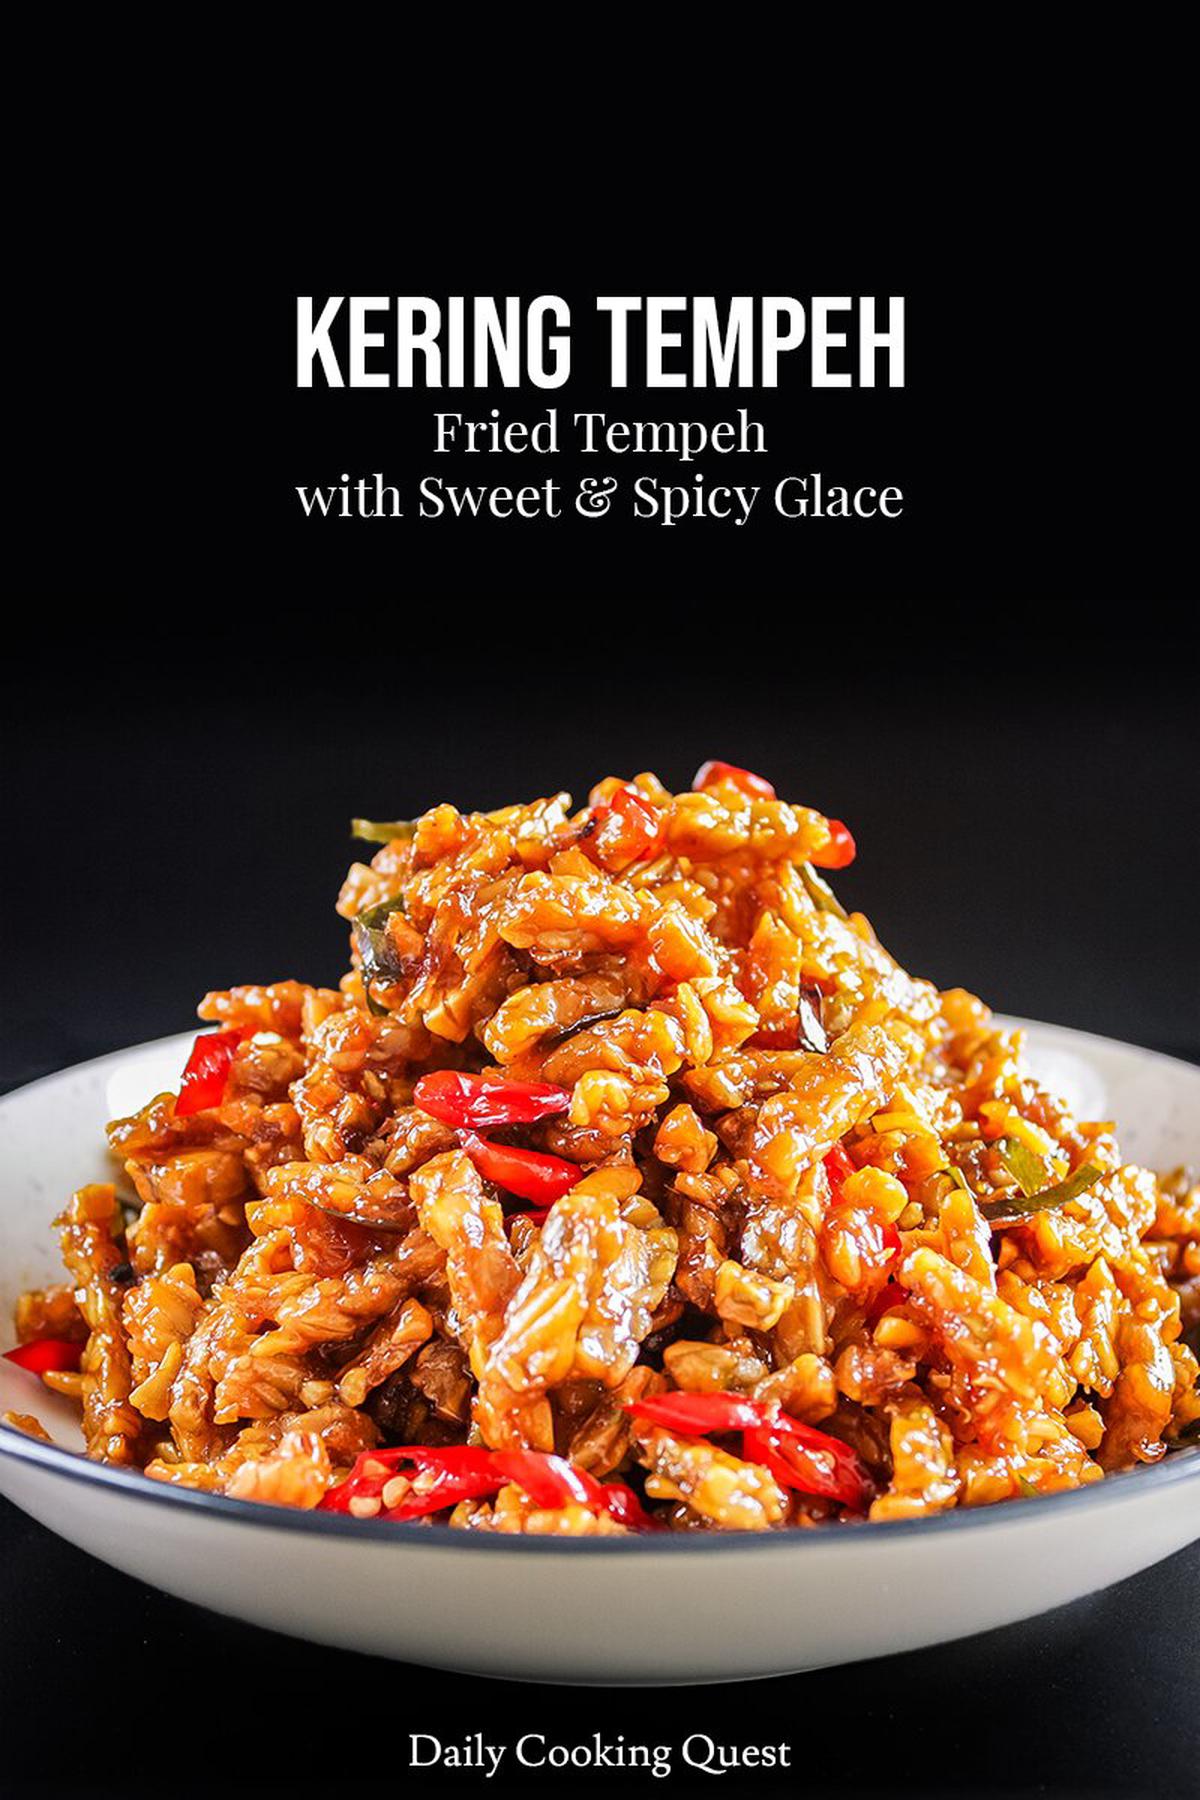 Kering Tempeh - Fried Tempeh with Sweet and Spicy Glace